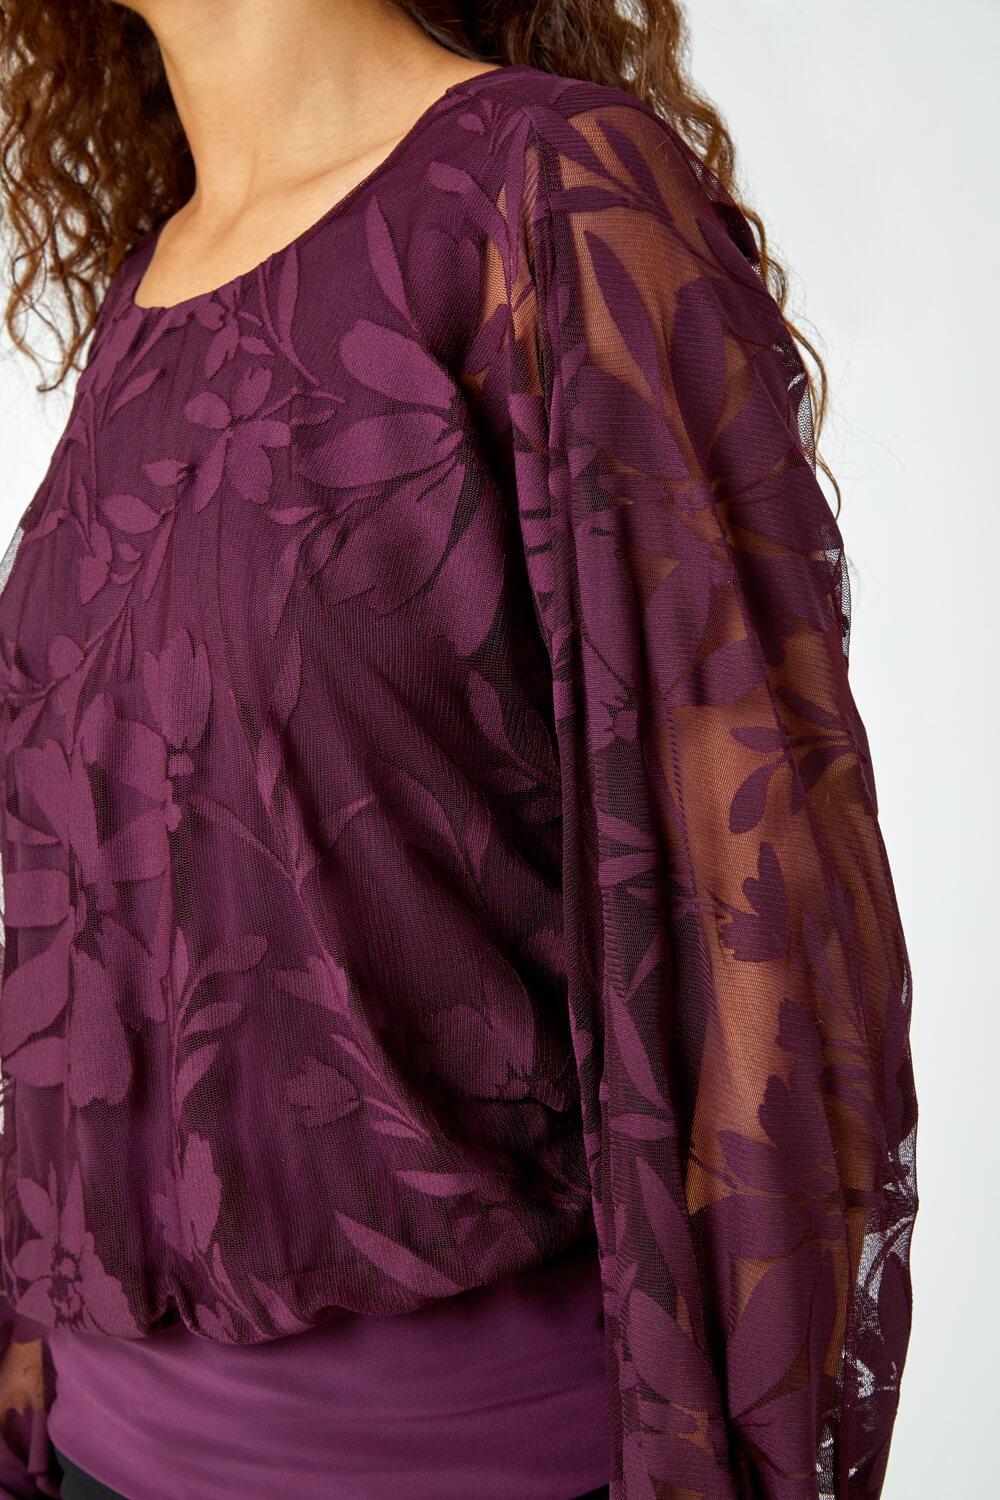 Plum Textured Floral Blouson Stretch Top, Image 5 of 5